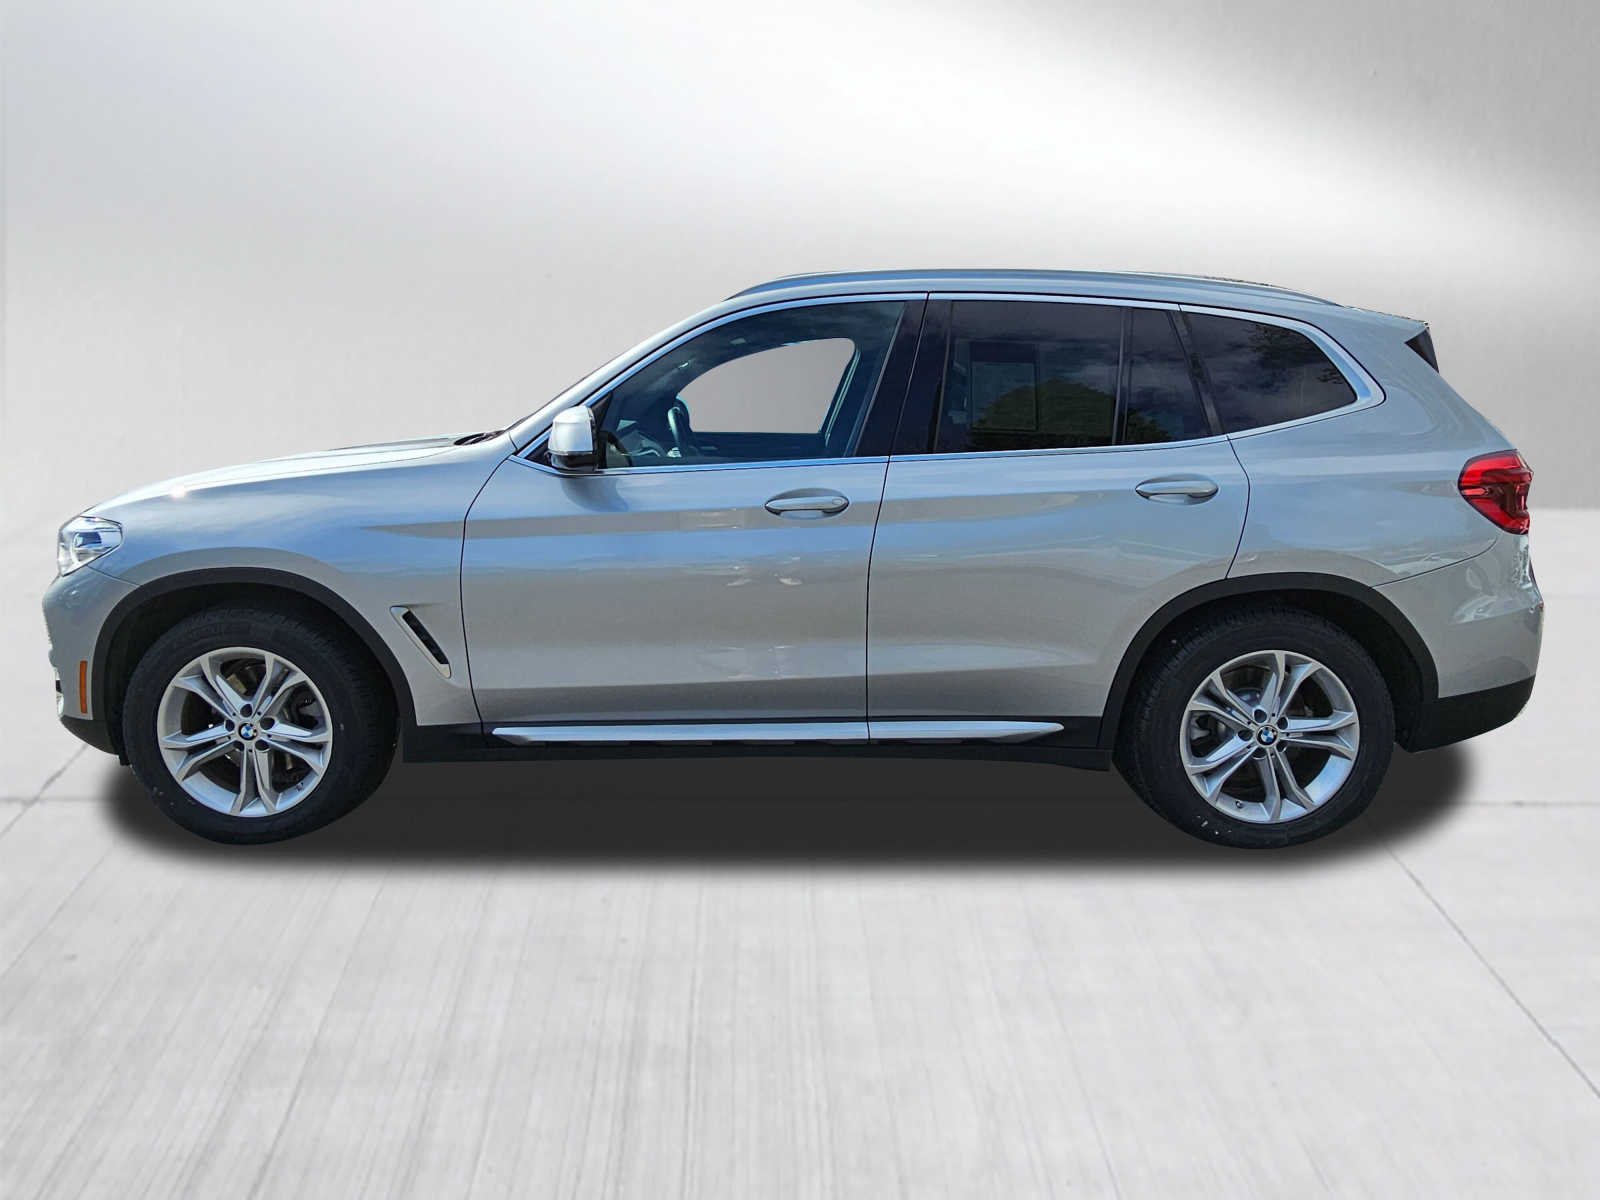 Used 2020 BMW X3 For Sale at Volvo Cars Seattle | VIN 